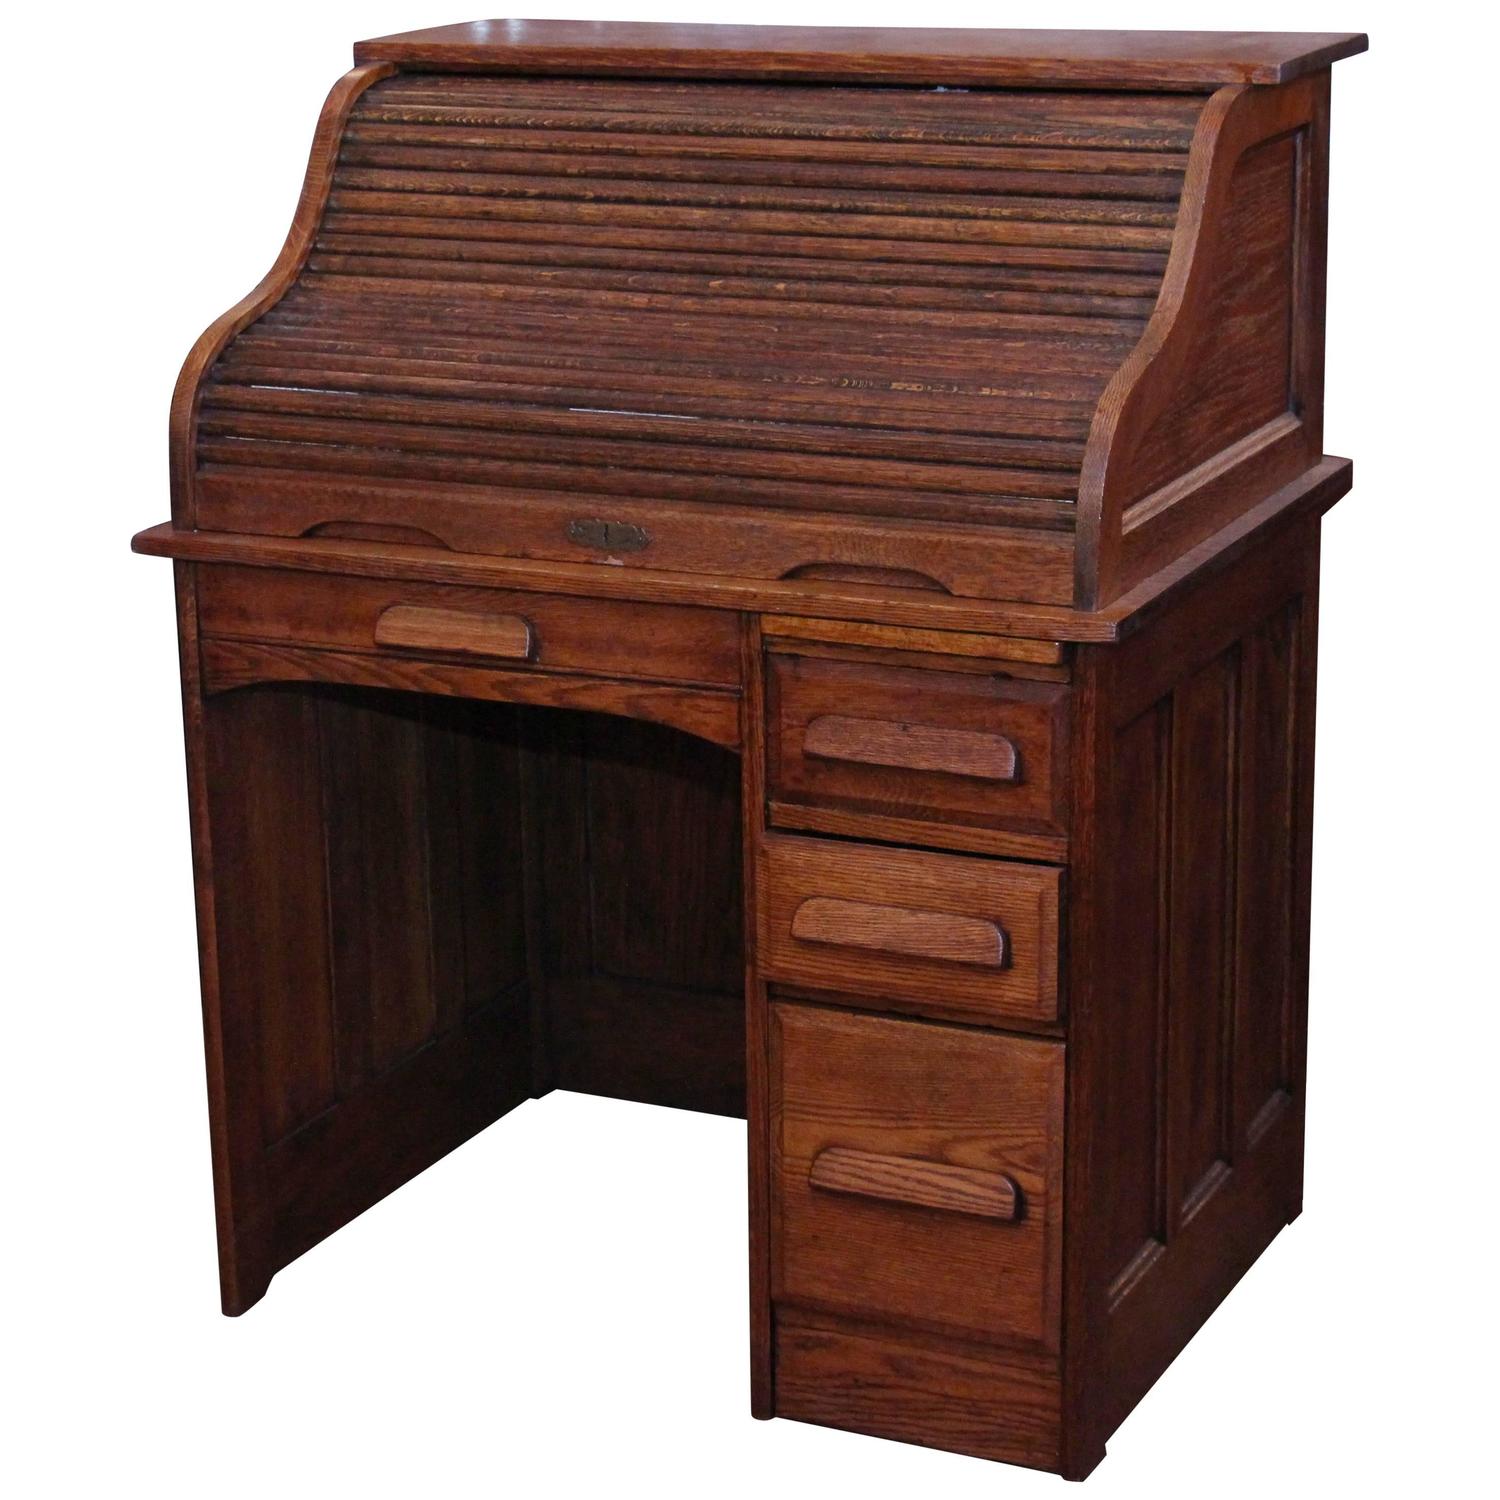 1880s Quarter Sawn Locking Oak Roll Top Desk With Right Side